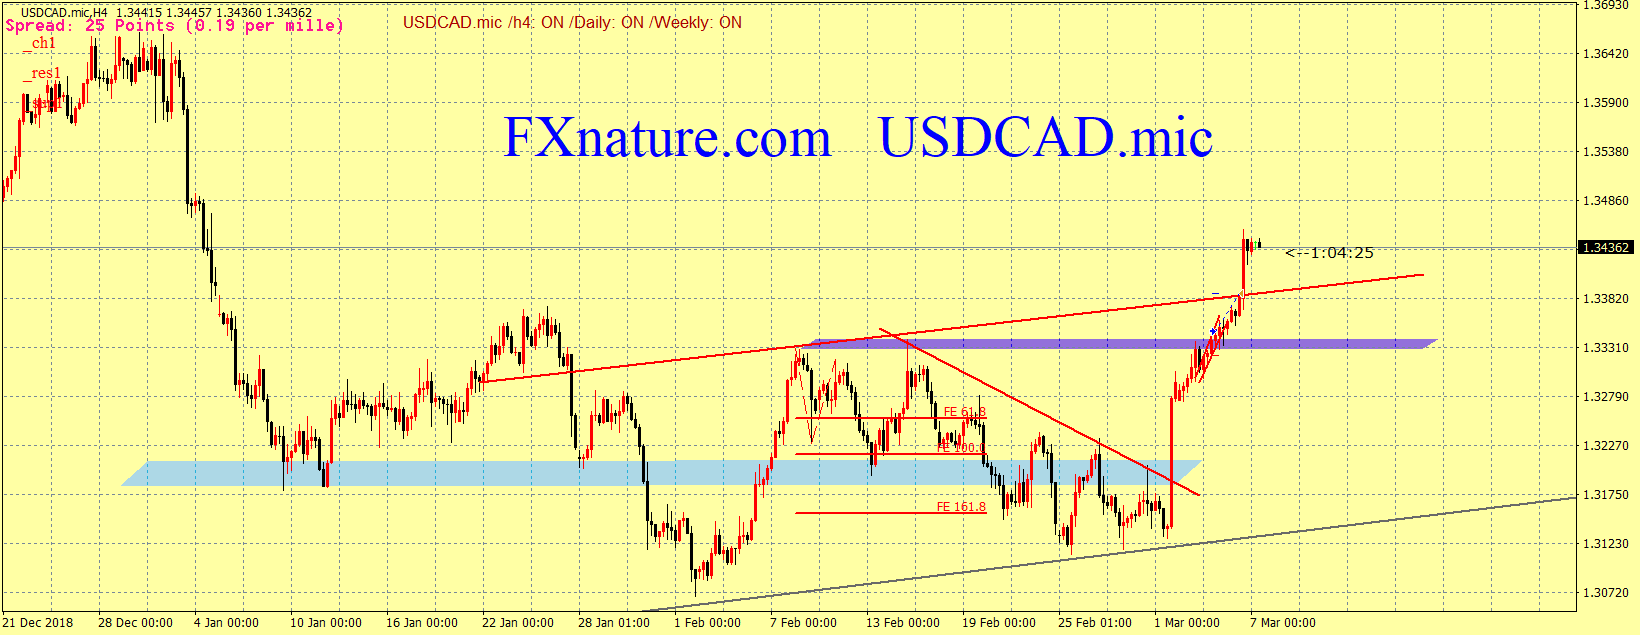 TECHNICAL ANALYSIS OF USDCAD 